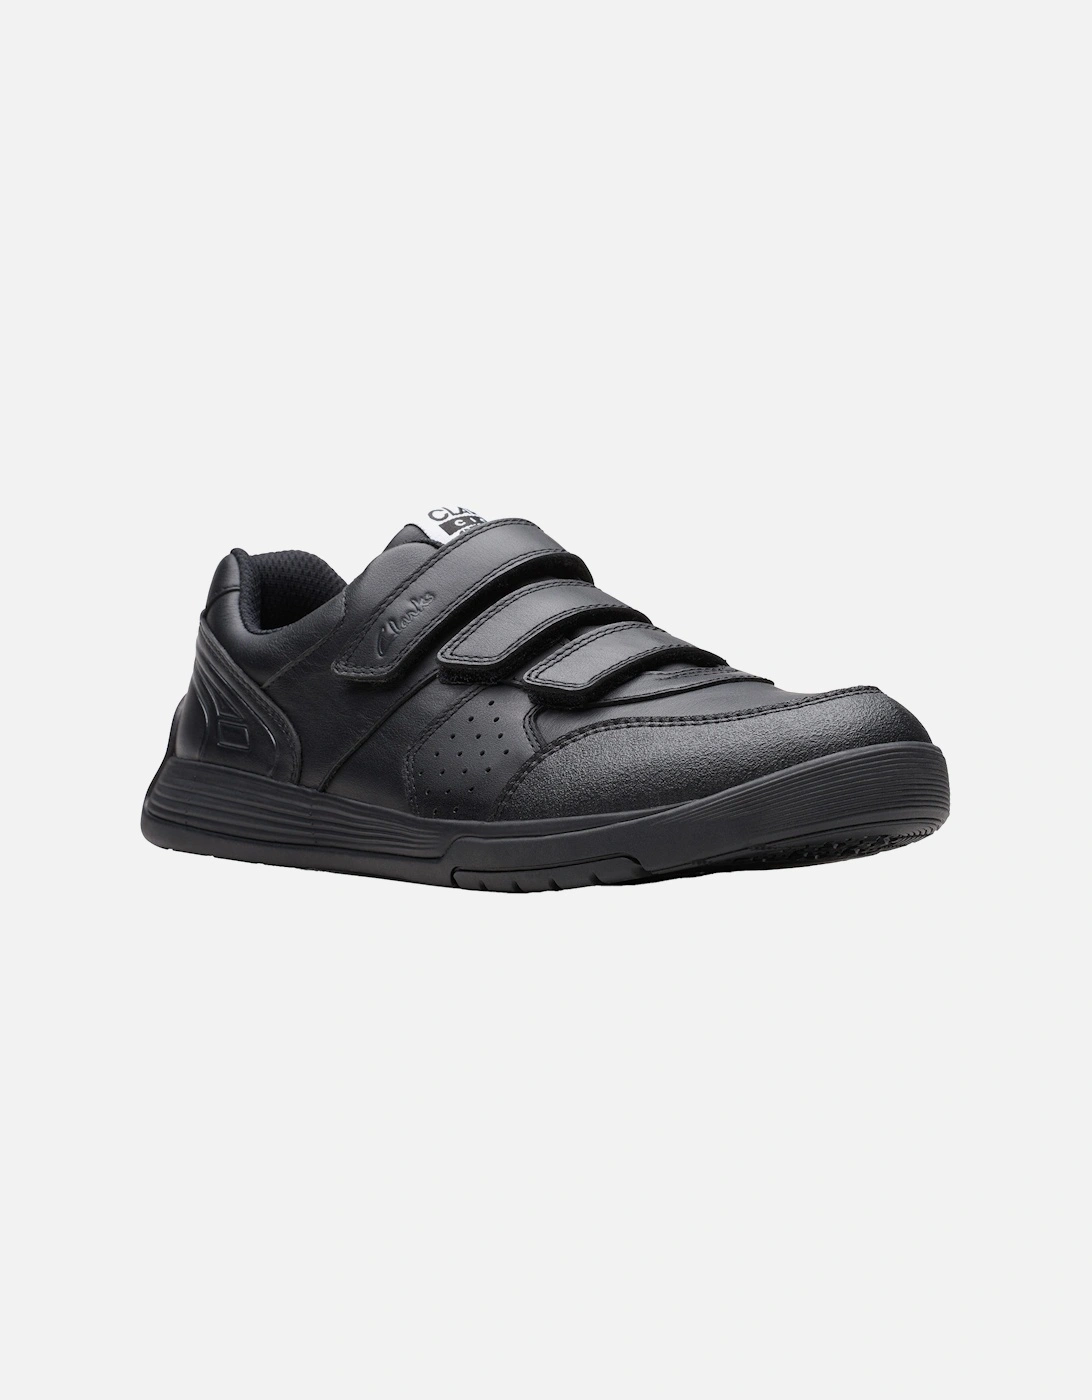 Youths Cica Star School Shoes (Black)